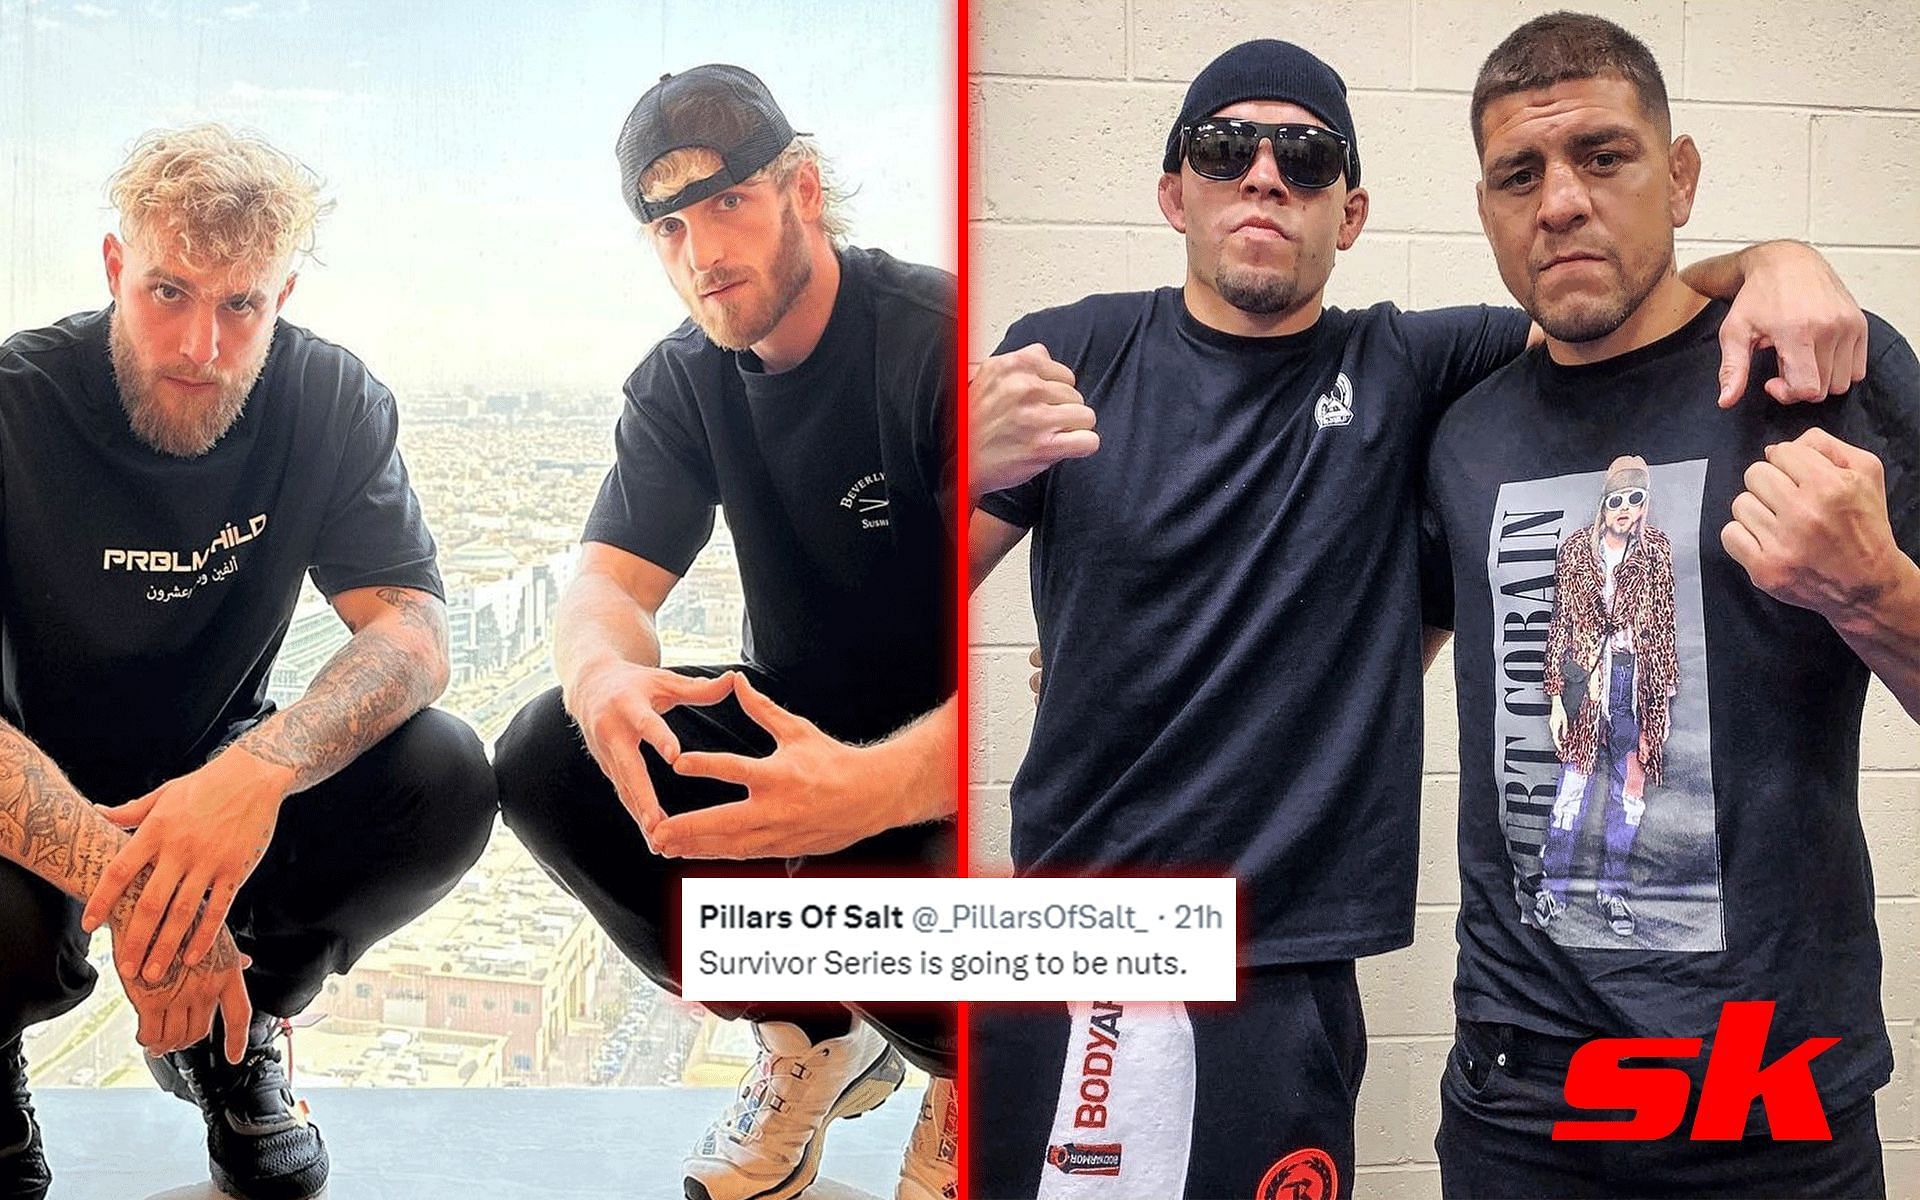 Paul brothers (Left) and Diaz brothers (Right) [Images via: @loganpaul and @nickdiaz209 on Instagram]